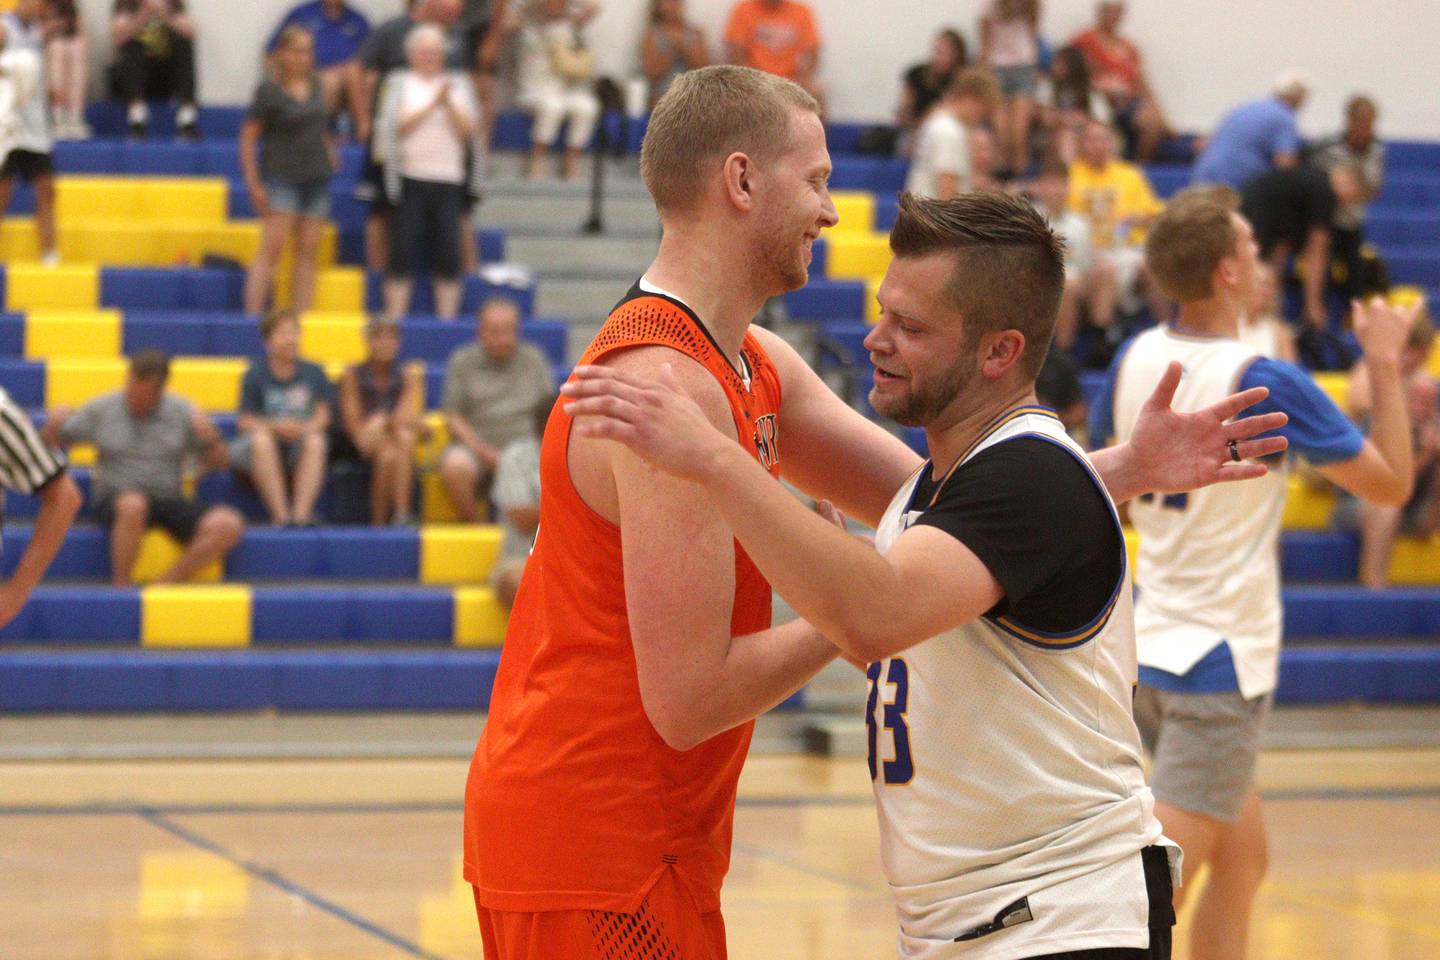 McHenry’s Brian Madson, left, and Johnsburg’s Mike Dixon greet each other after an alumni basketball game at Johnsburg High School Saturday evening to benefit the family of Jackson Werderitch, a 10-year-old who was struck by a car.